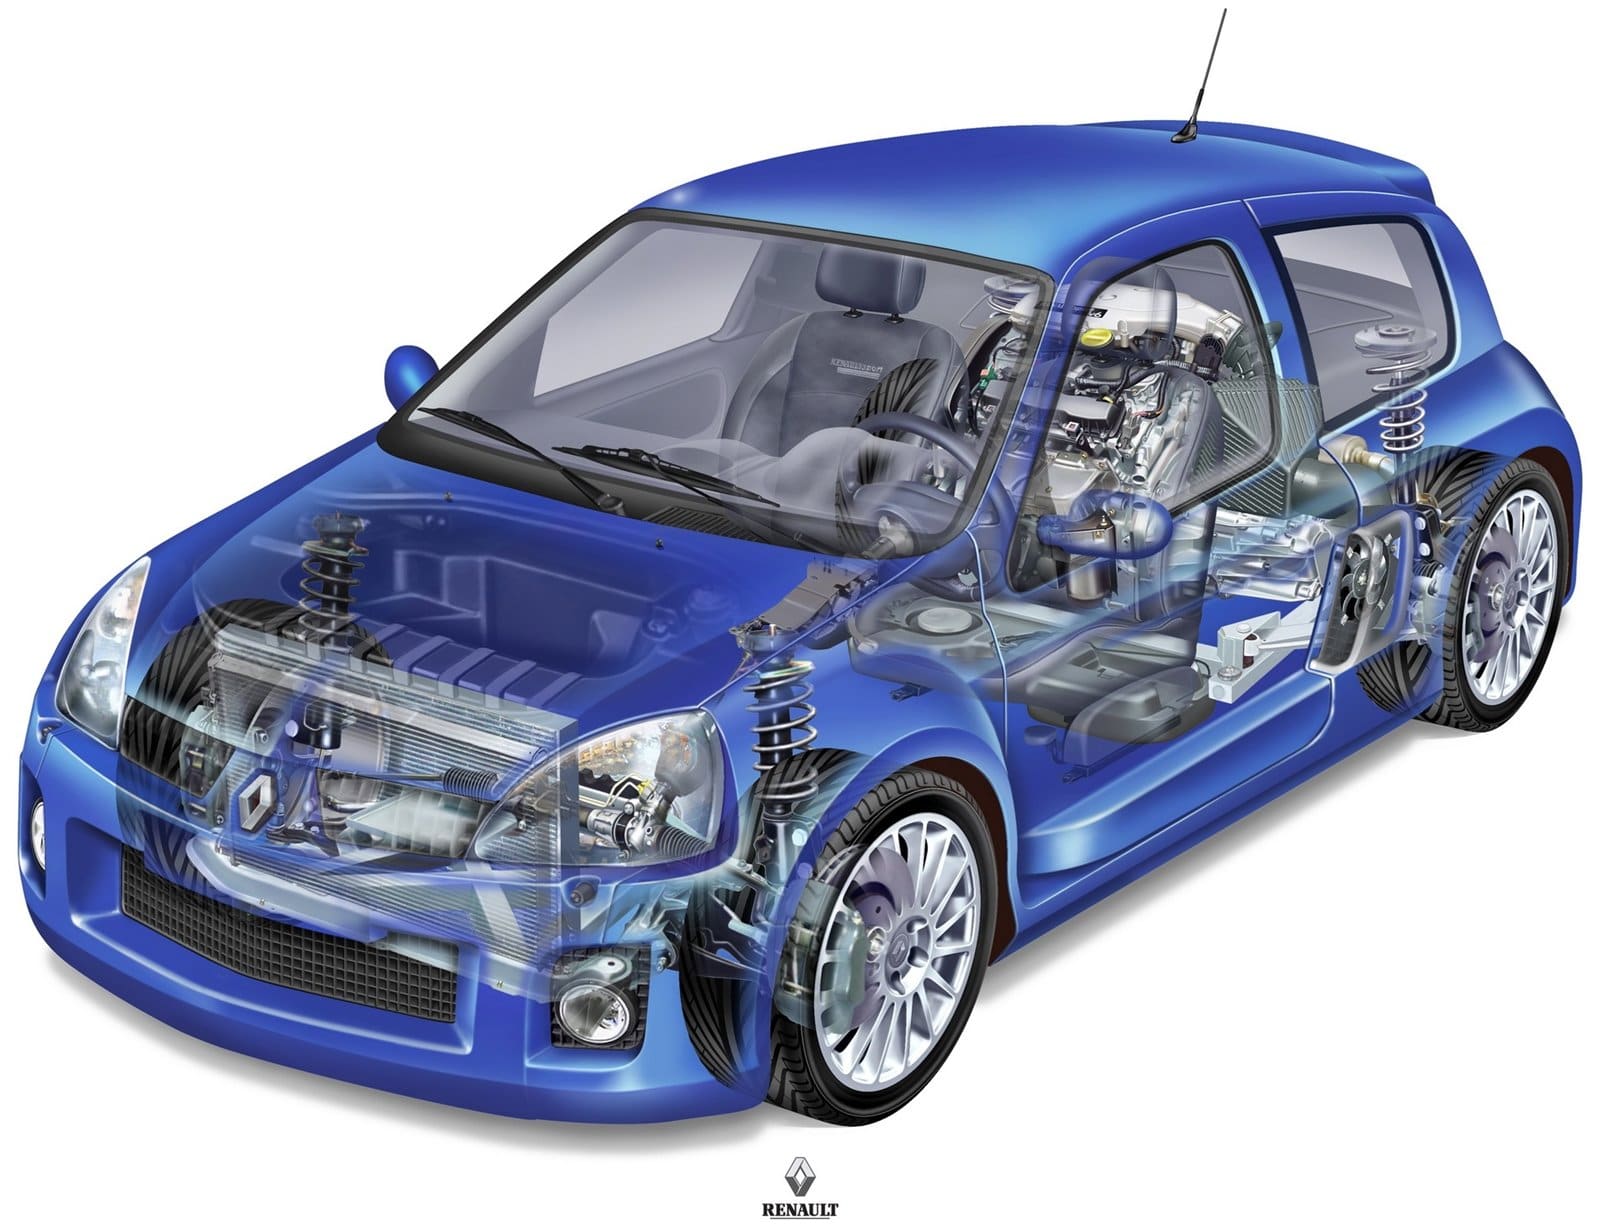 it was going to be a Twingo with a Ferrari engine